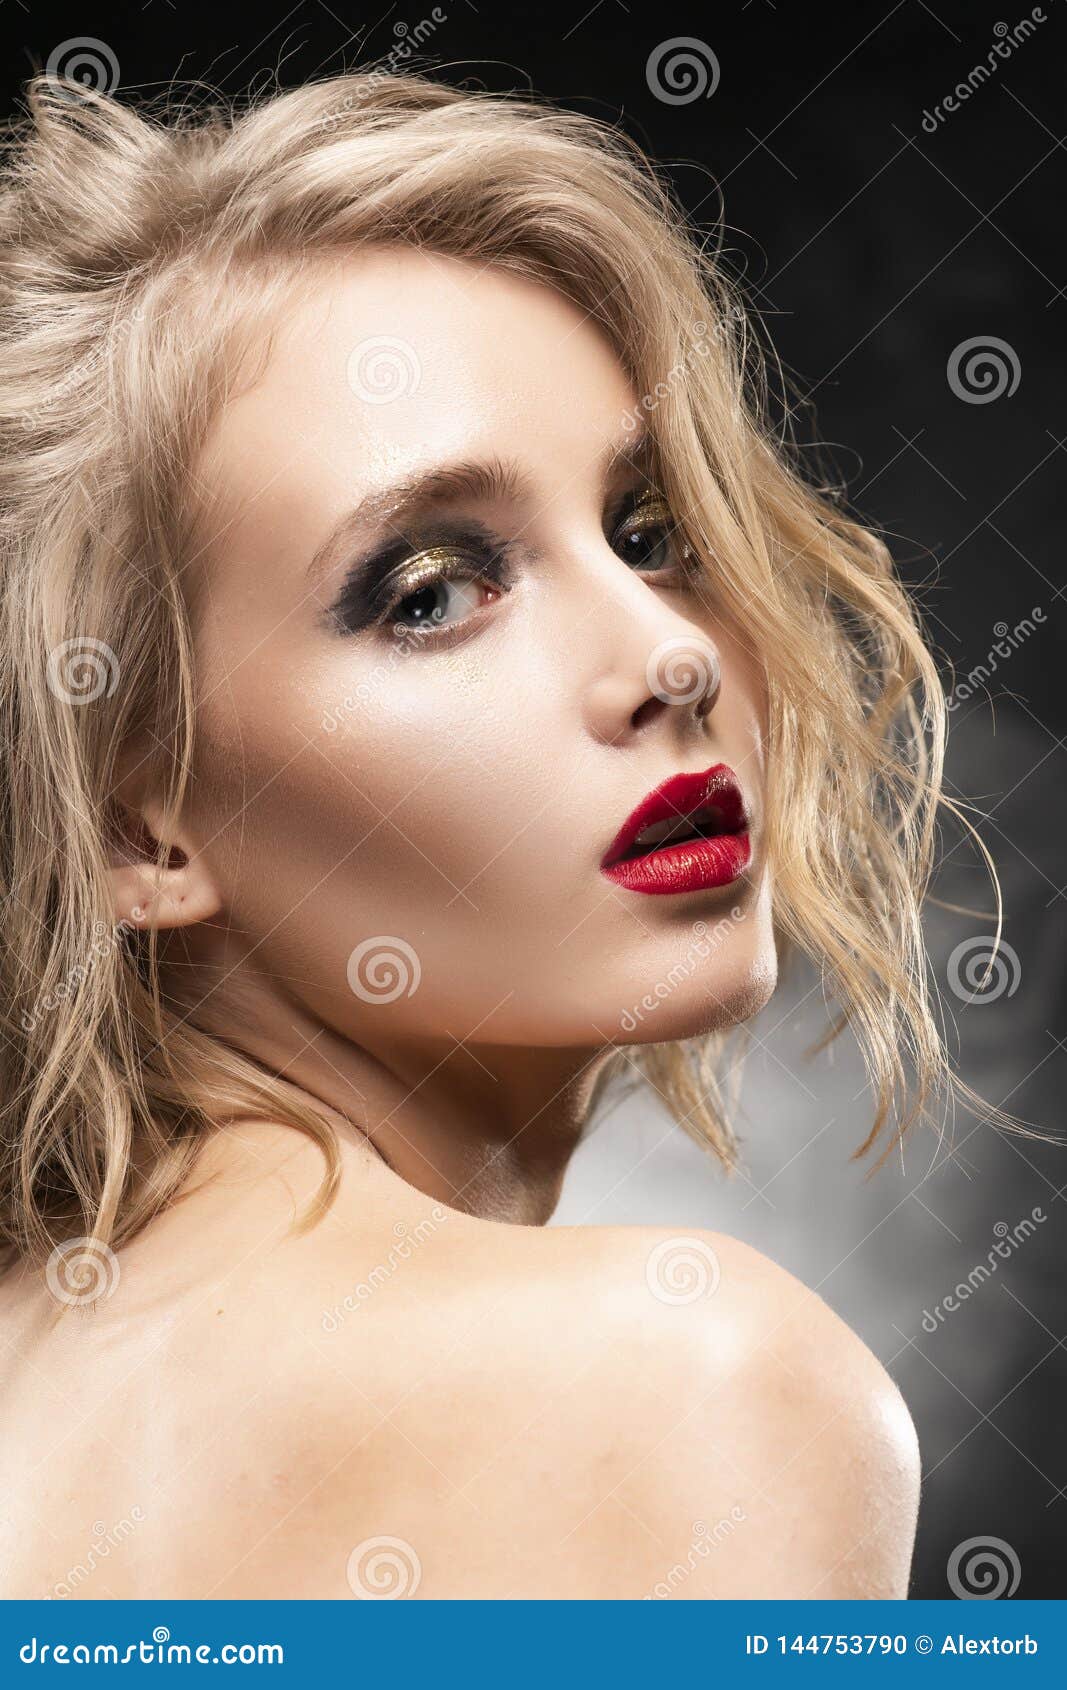 Beautiful Young Braless Slim Blonde Girl With Disheveled Hair And Aggressive Makeup Wearing An